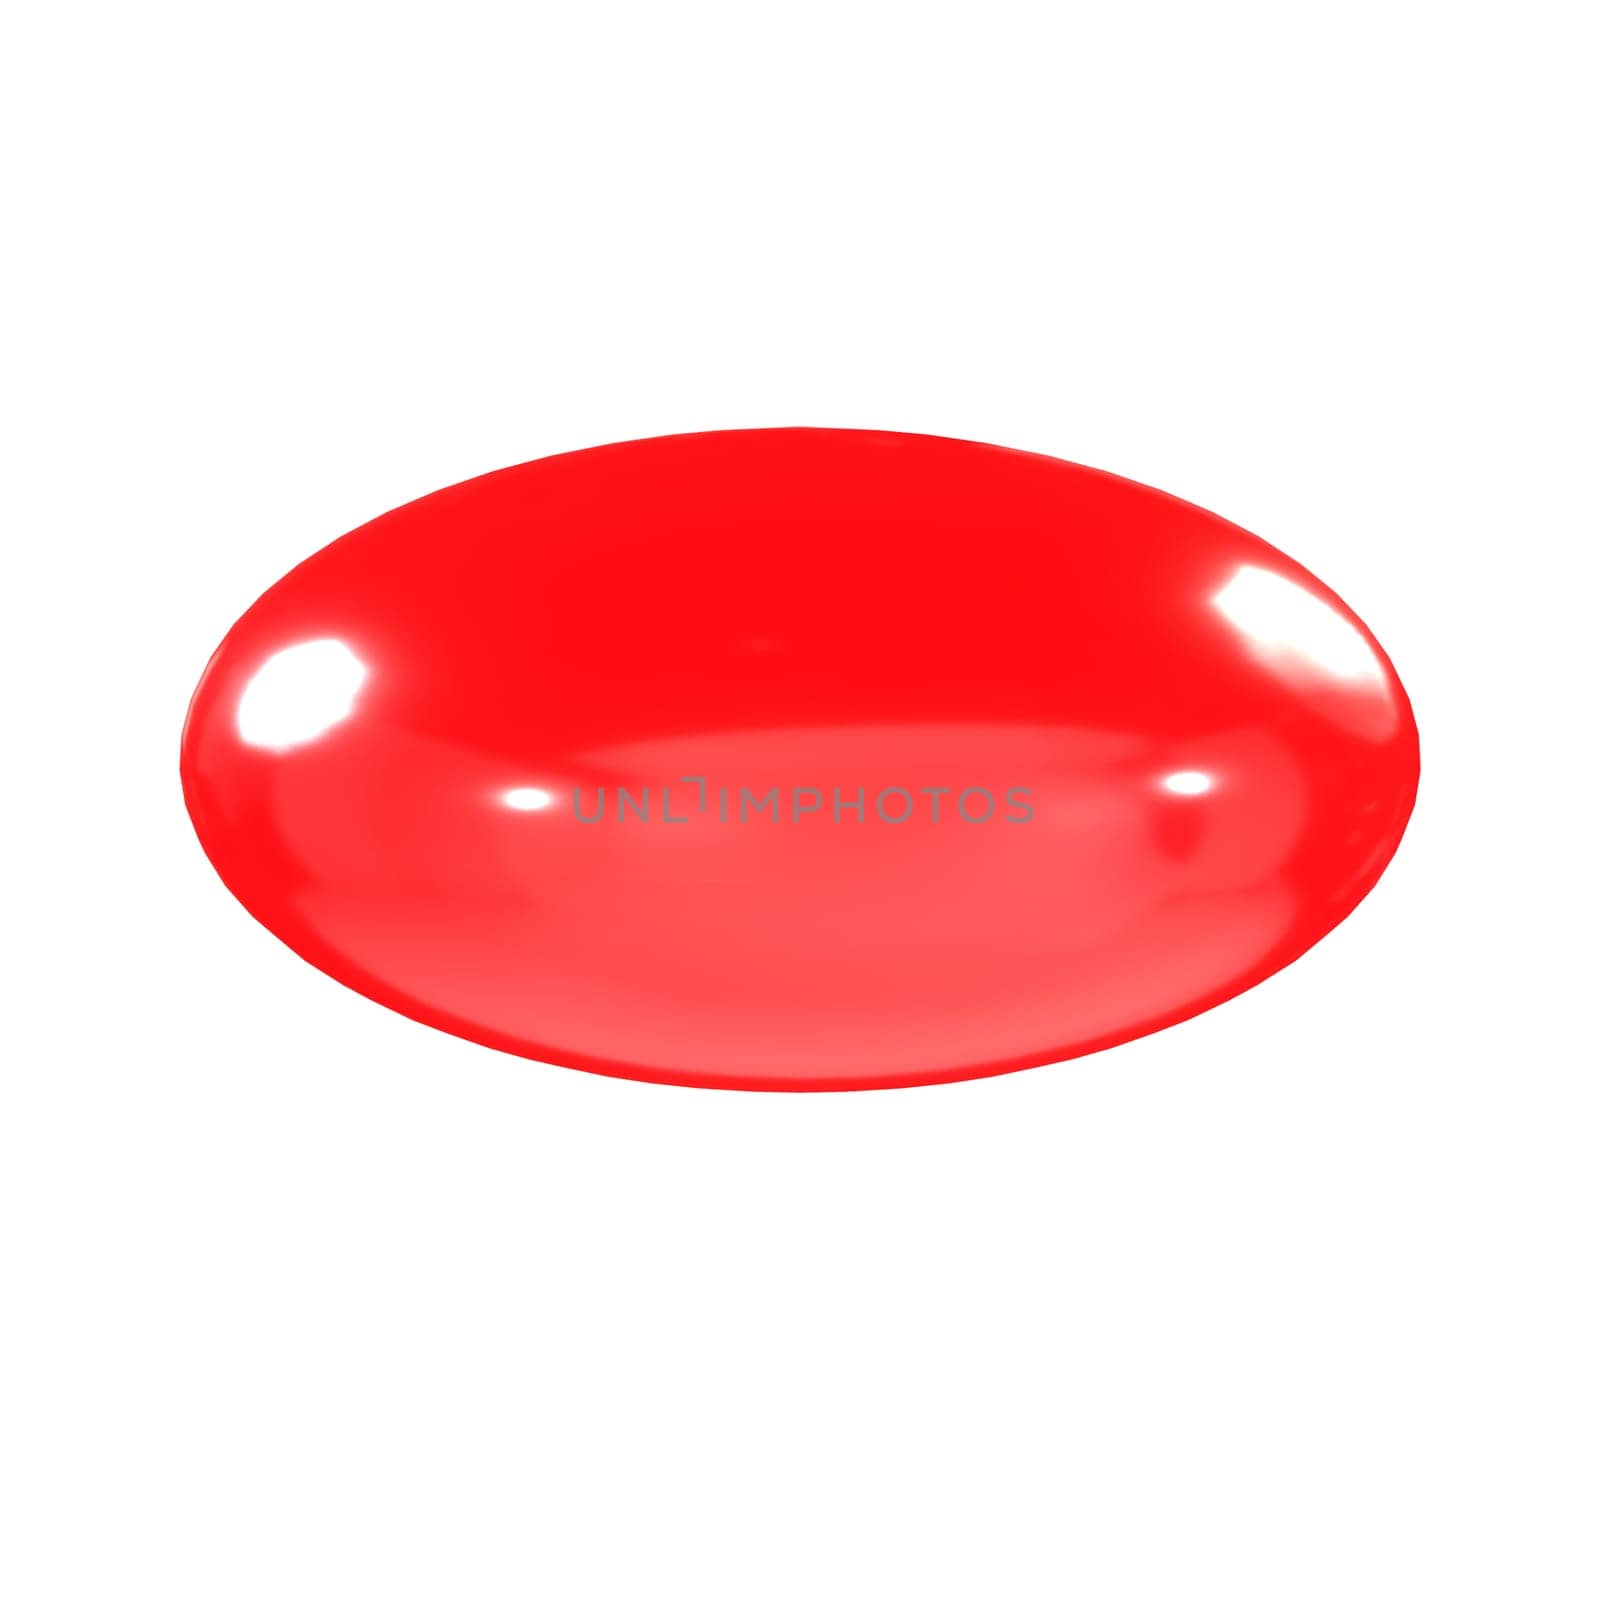 Red Little Candy isolated on white background. High quality 3d illustration